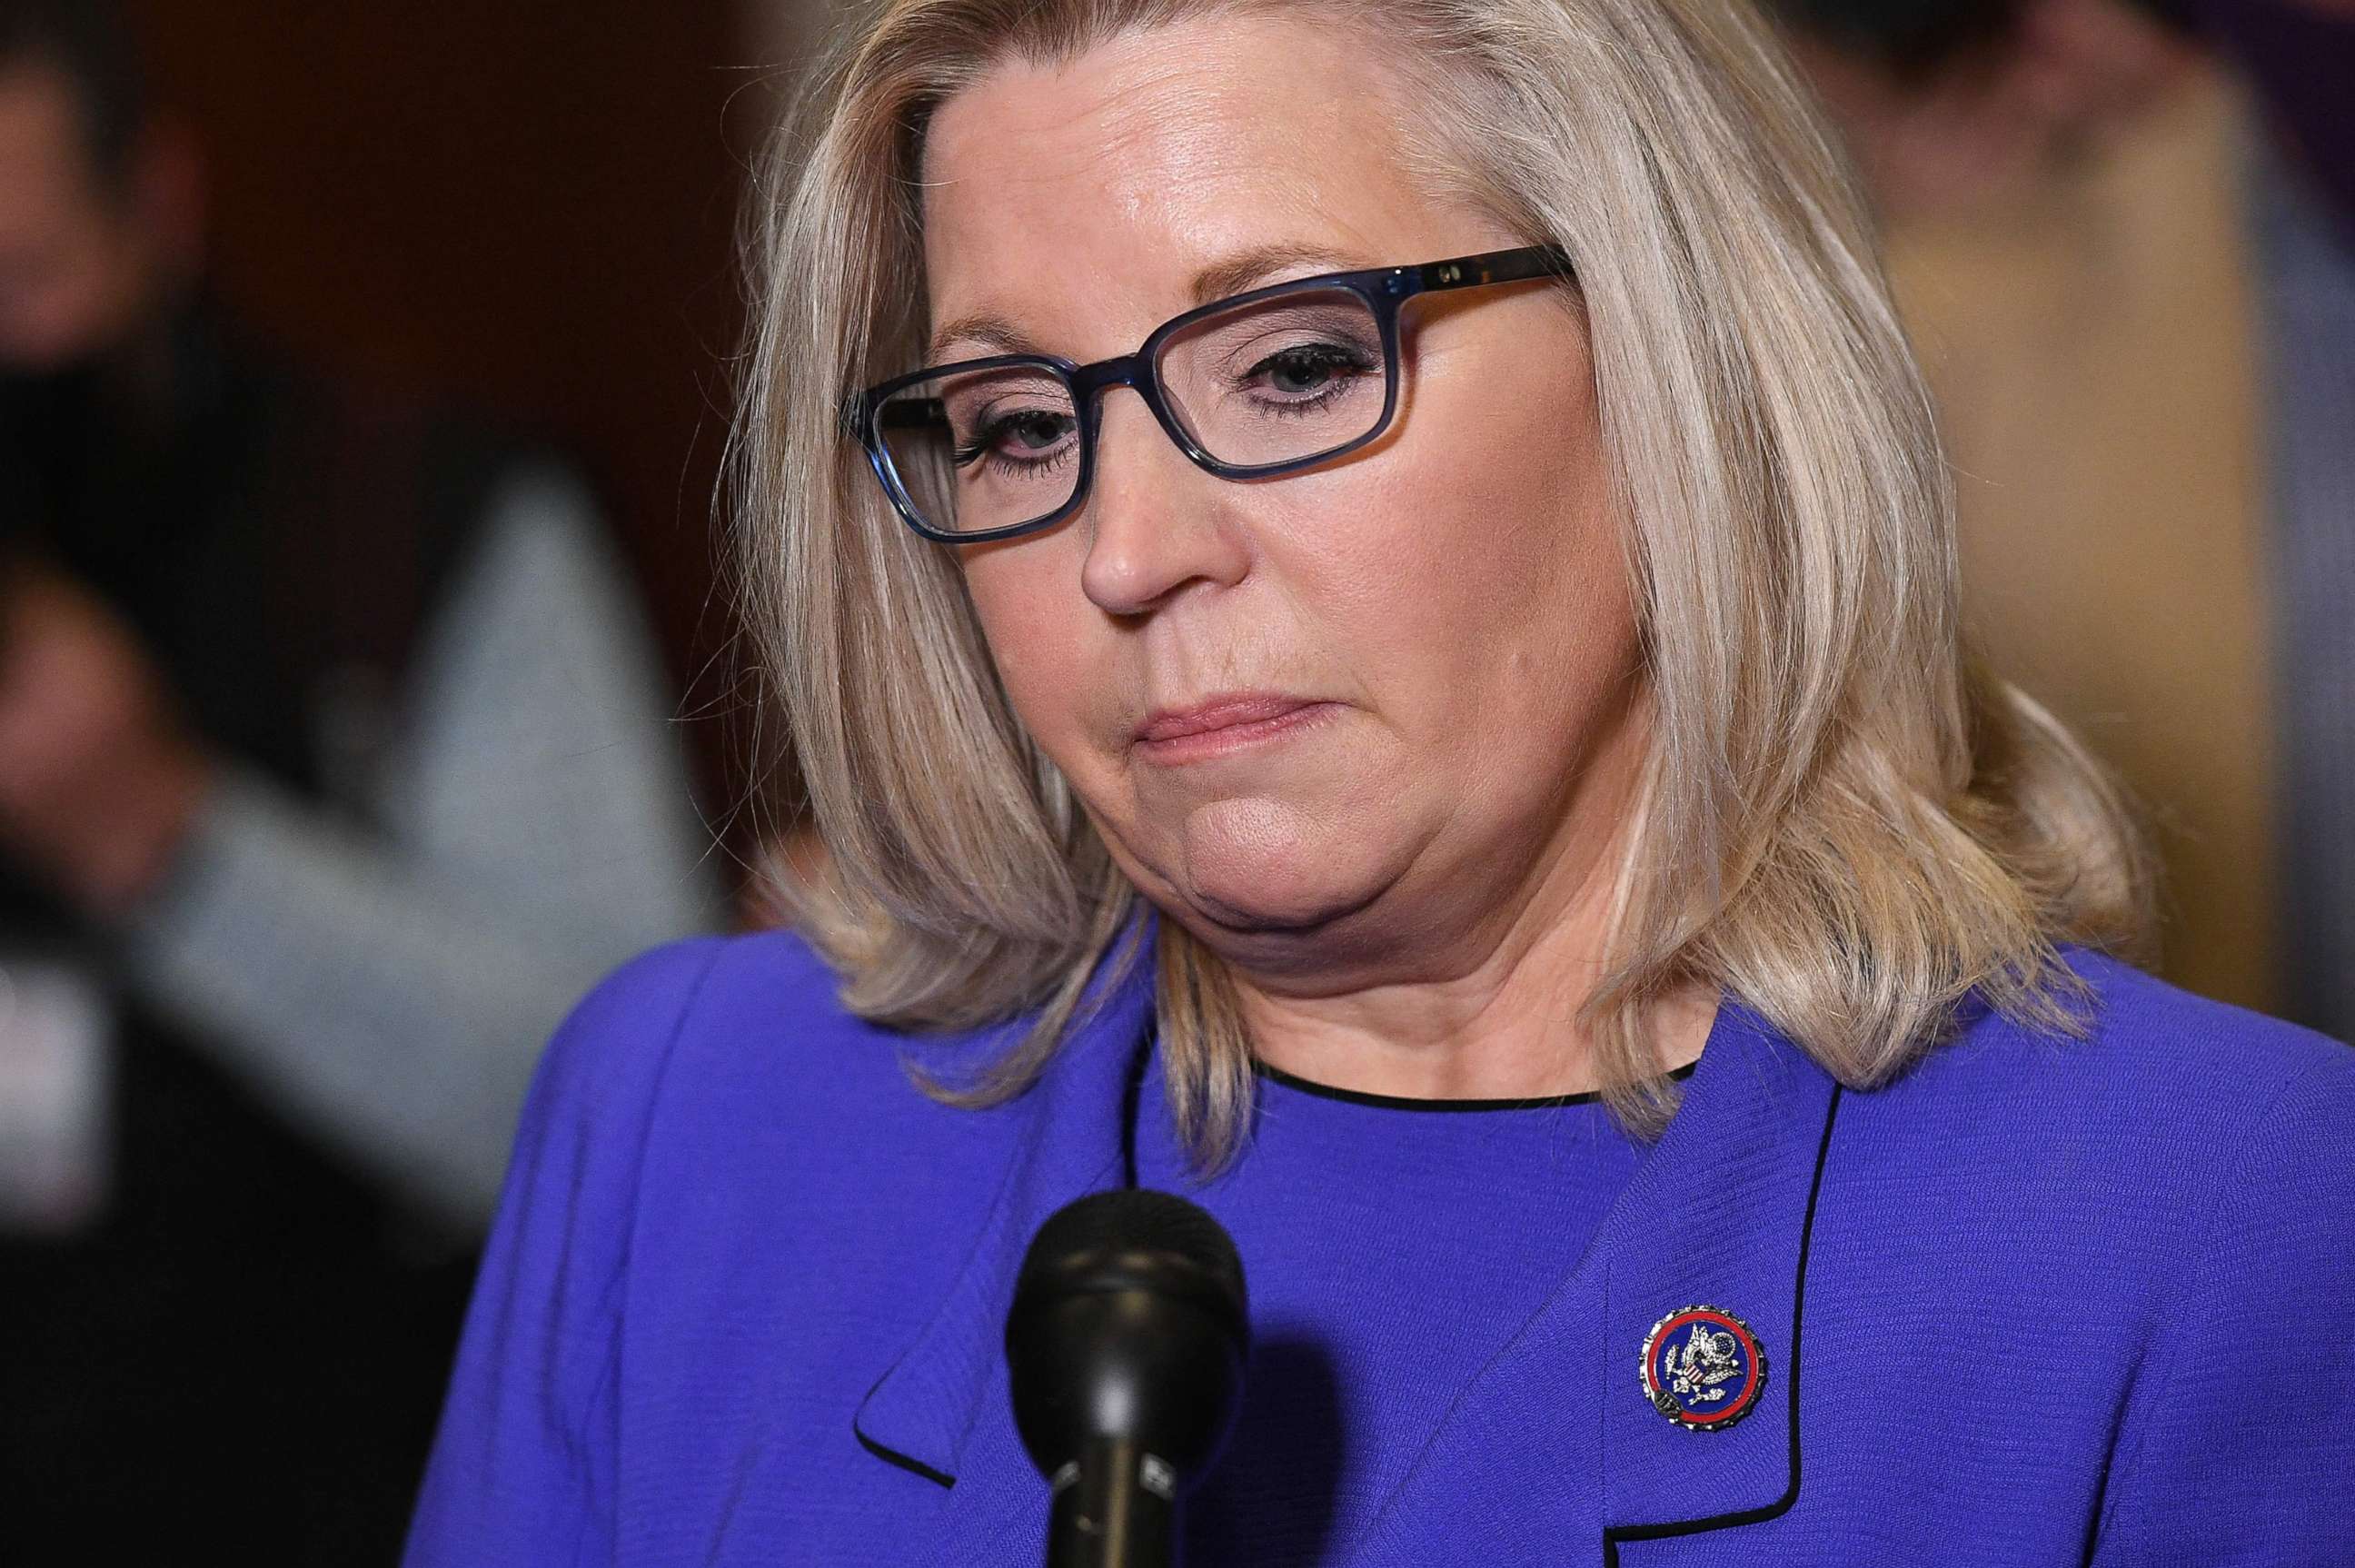 PHOTO: Rep. Liz Cheney speaks to the media at the US Capitol in Washington, on May 12, 2021.